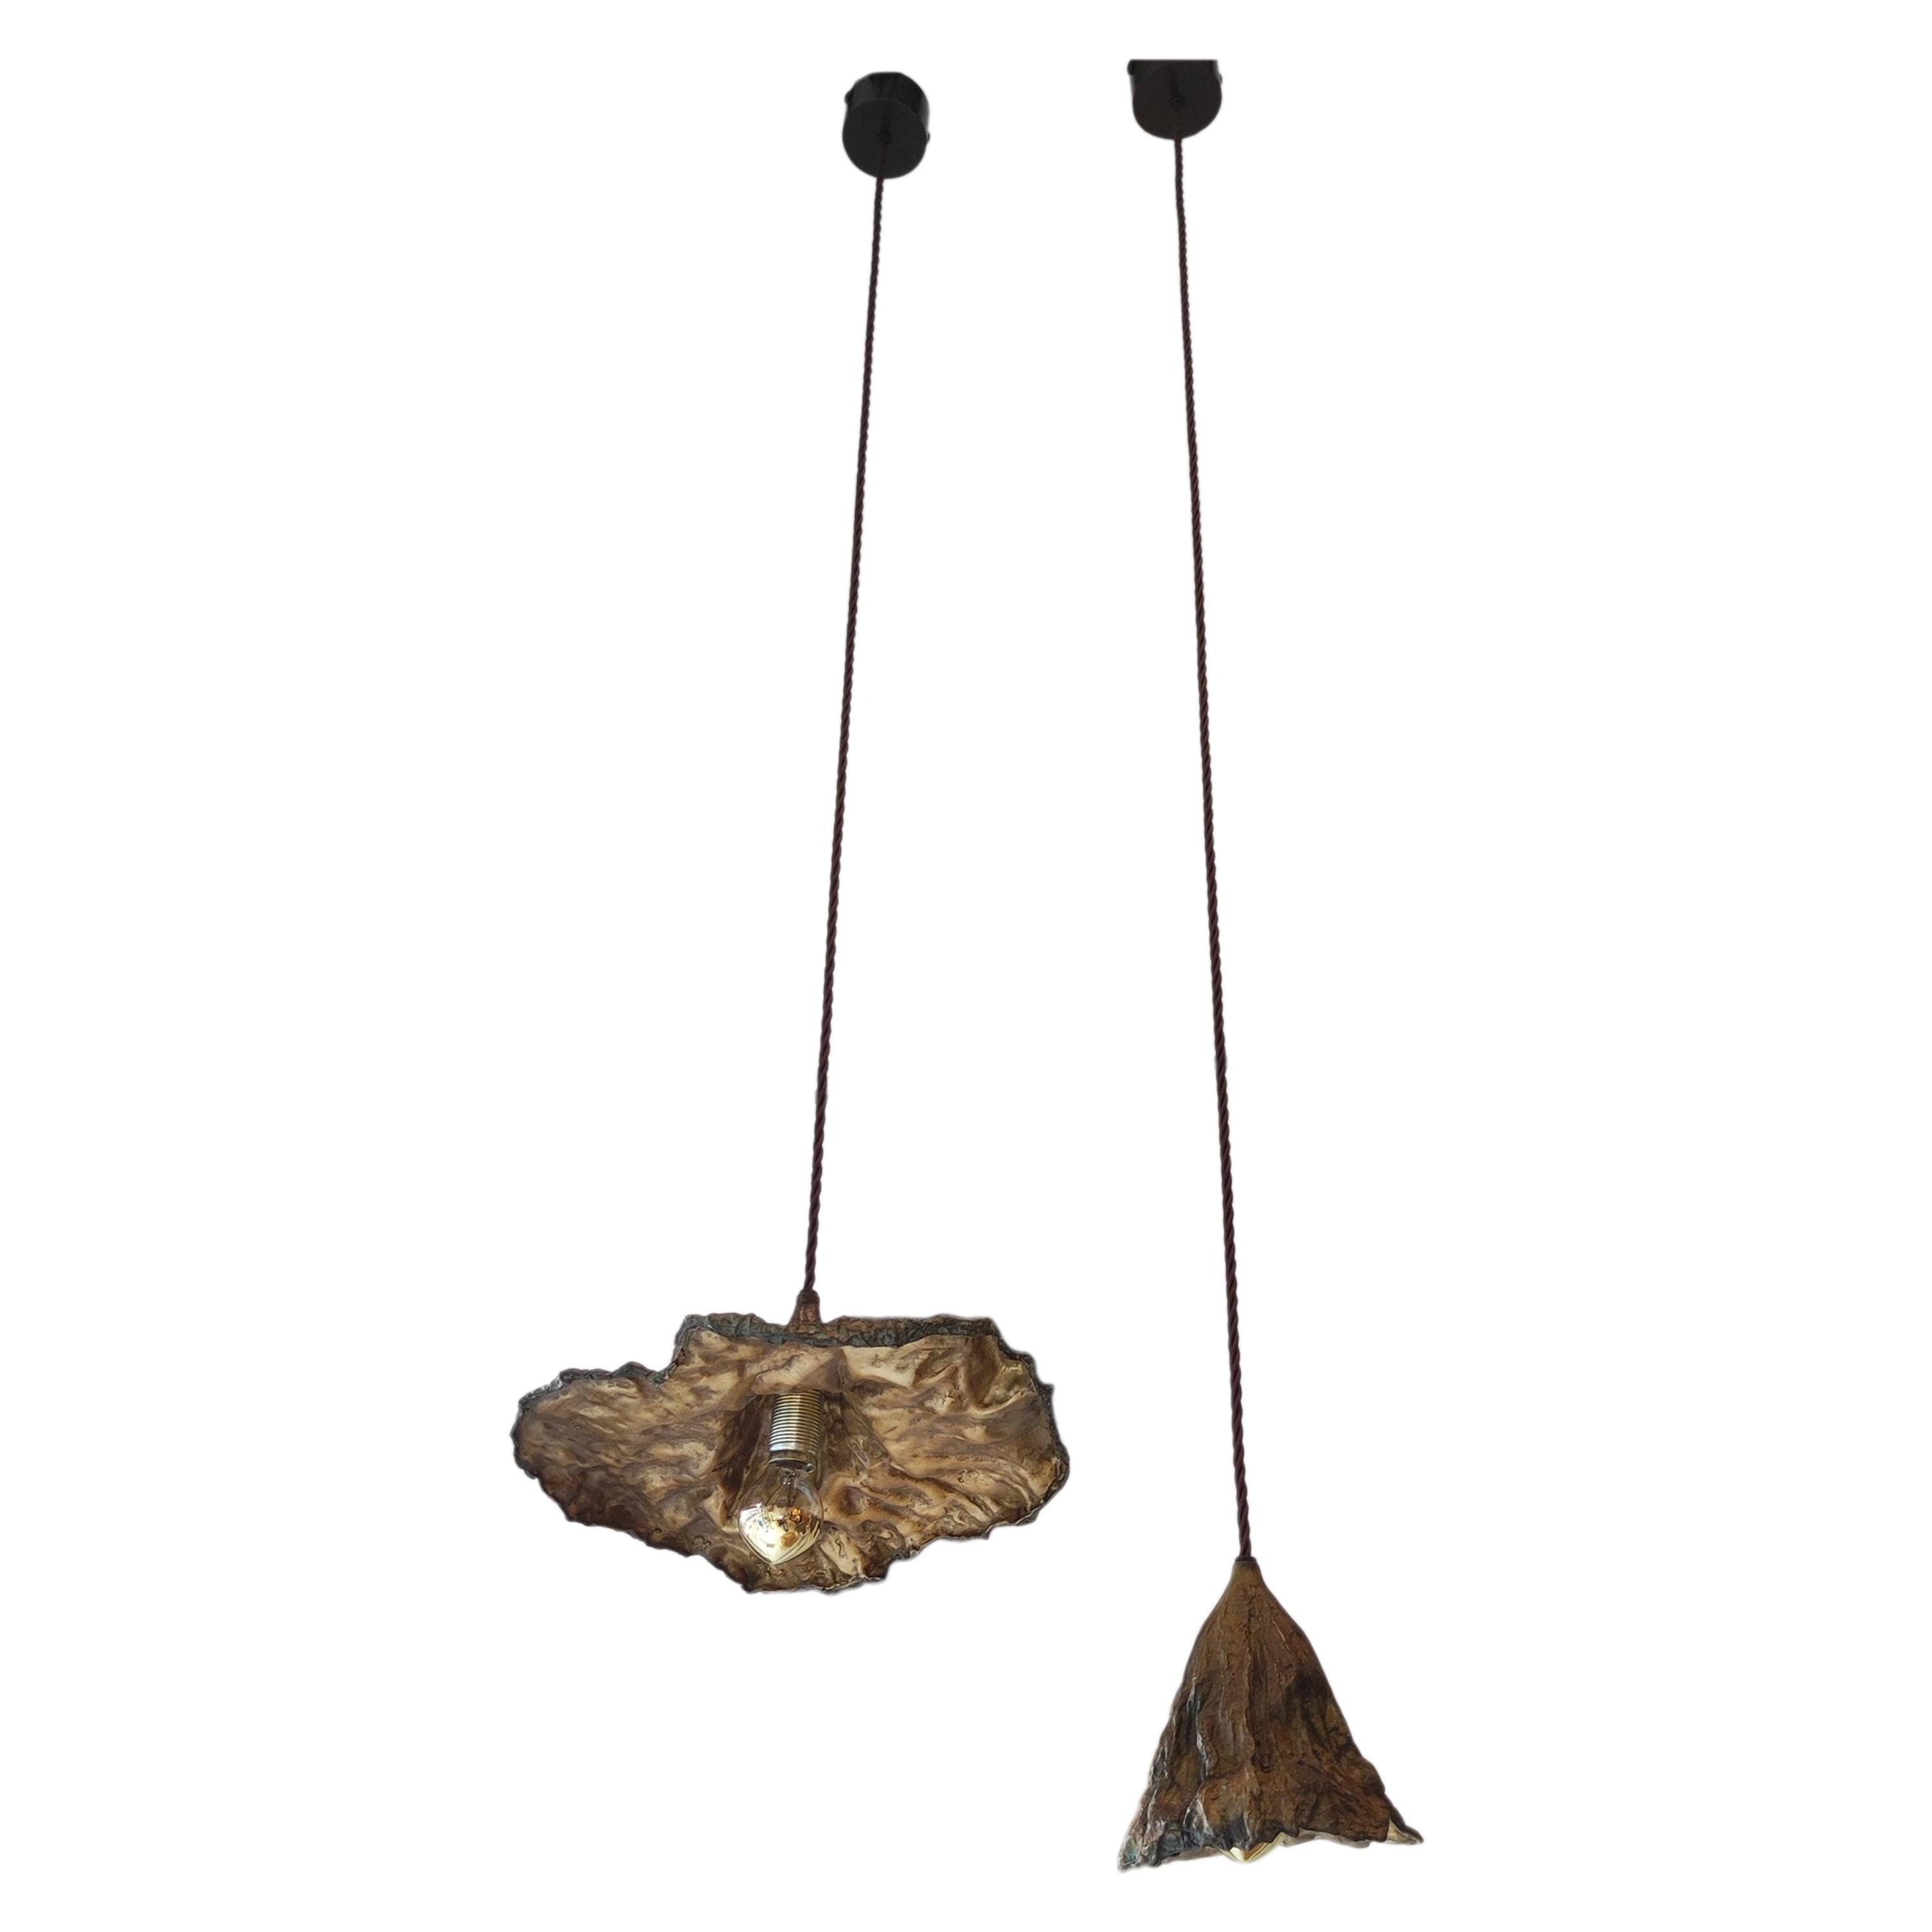 Set of two Bronze Light Suspension in the Shape of a Faded Leaf For Sale